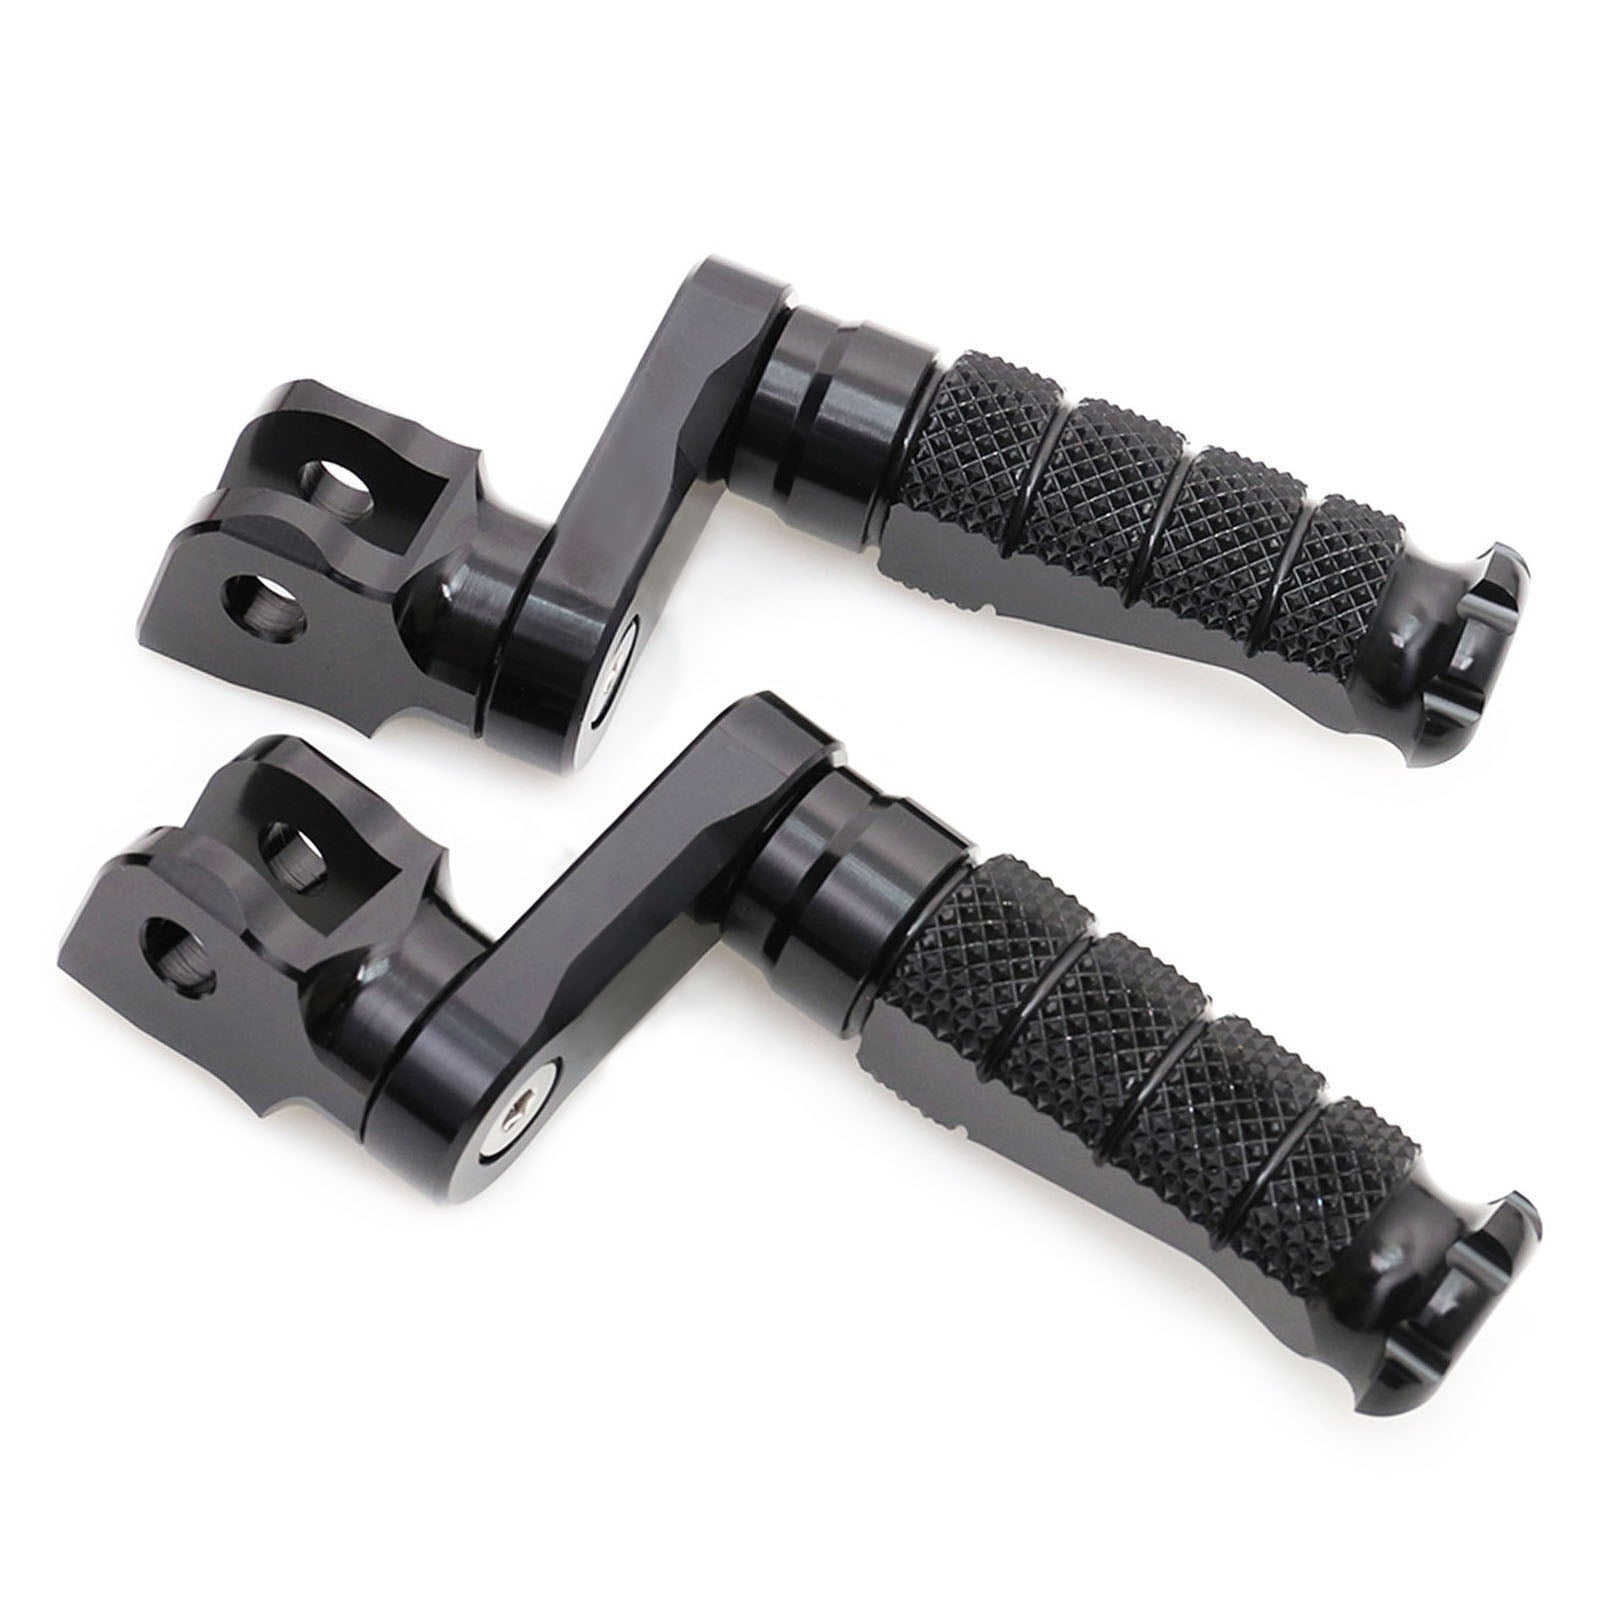 Fit Ducati 749 996 1098 1198 Diavel RFIGHT 40mm Extension Front Black Foot Pegs - MC Motoparts